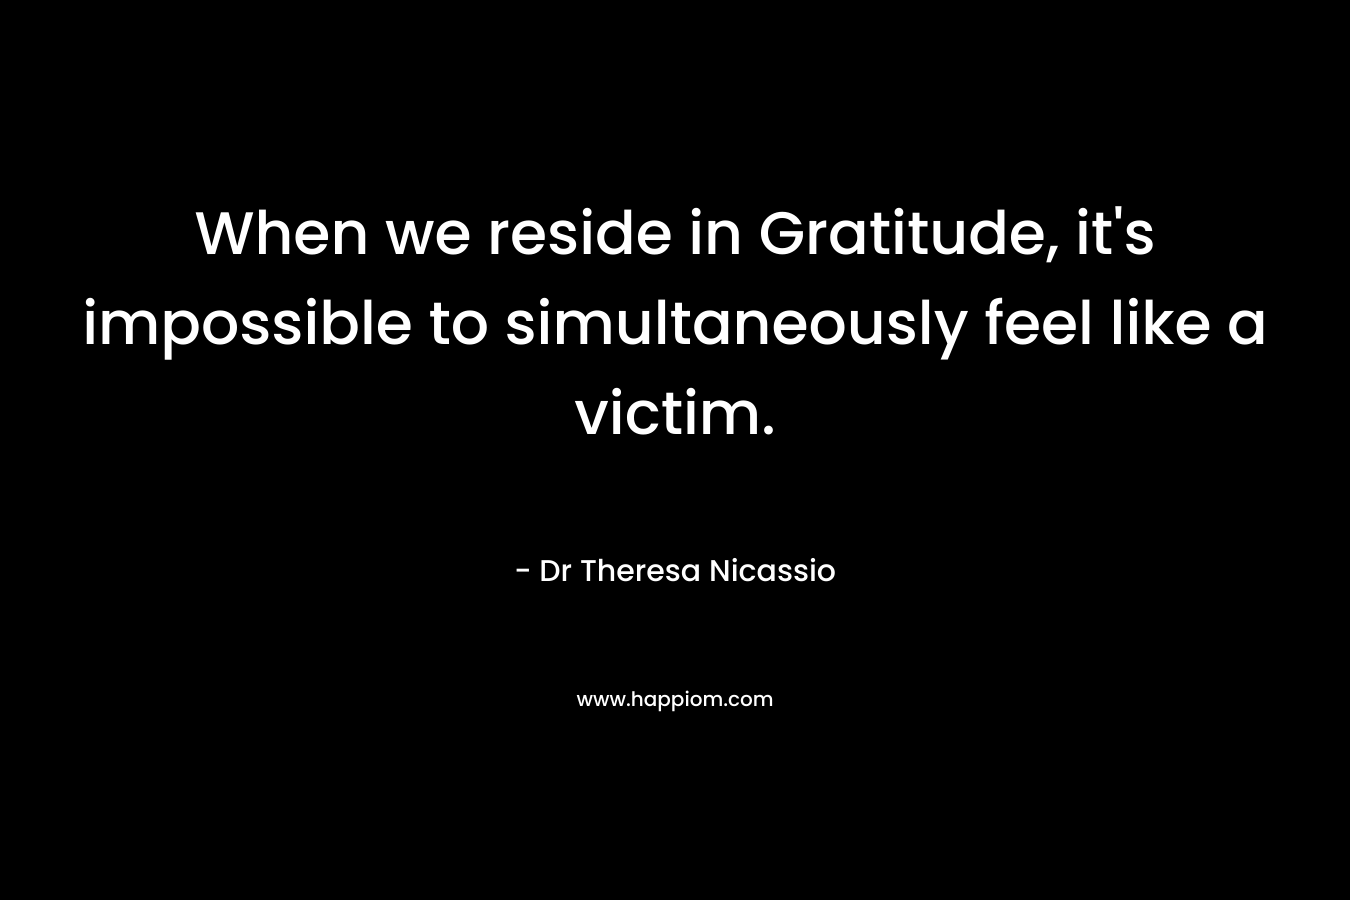 When we reside in Gratitude, it’s impossible to simultaneously feel like a victim. – Dr Theresa Nicassio